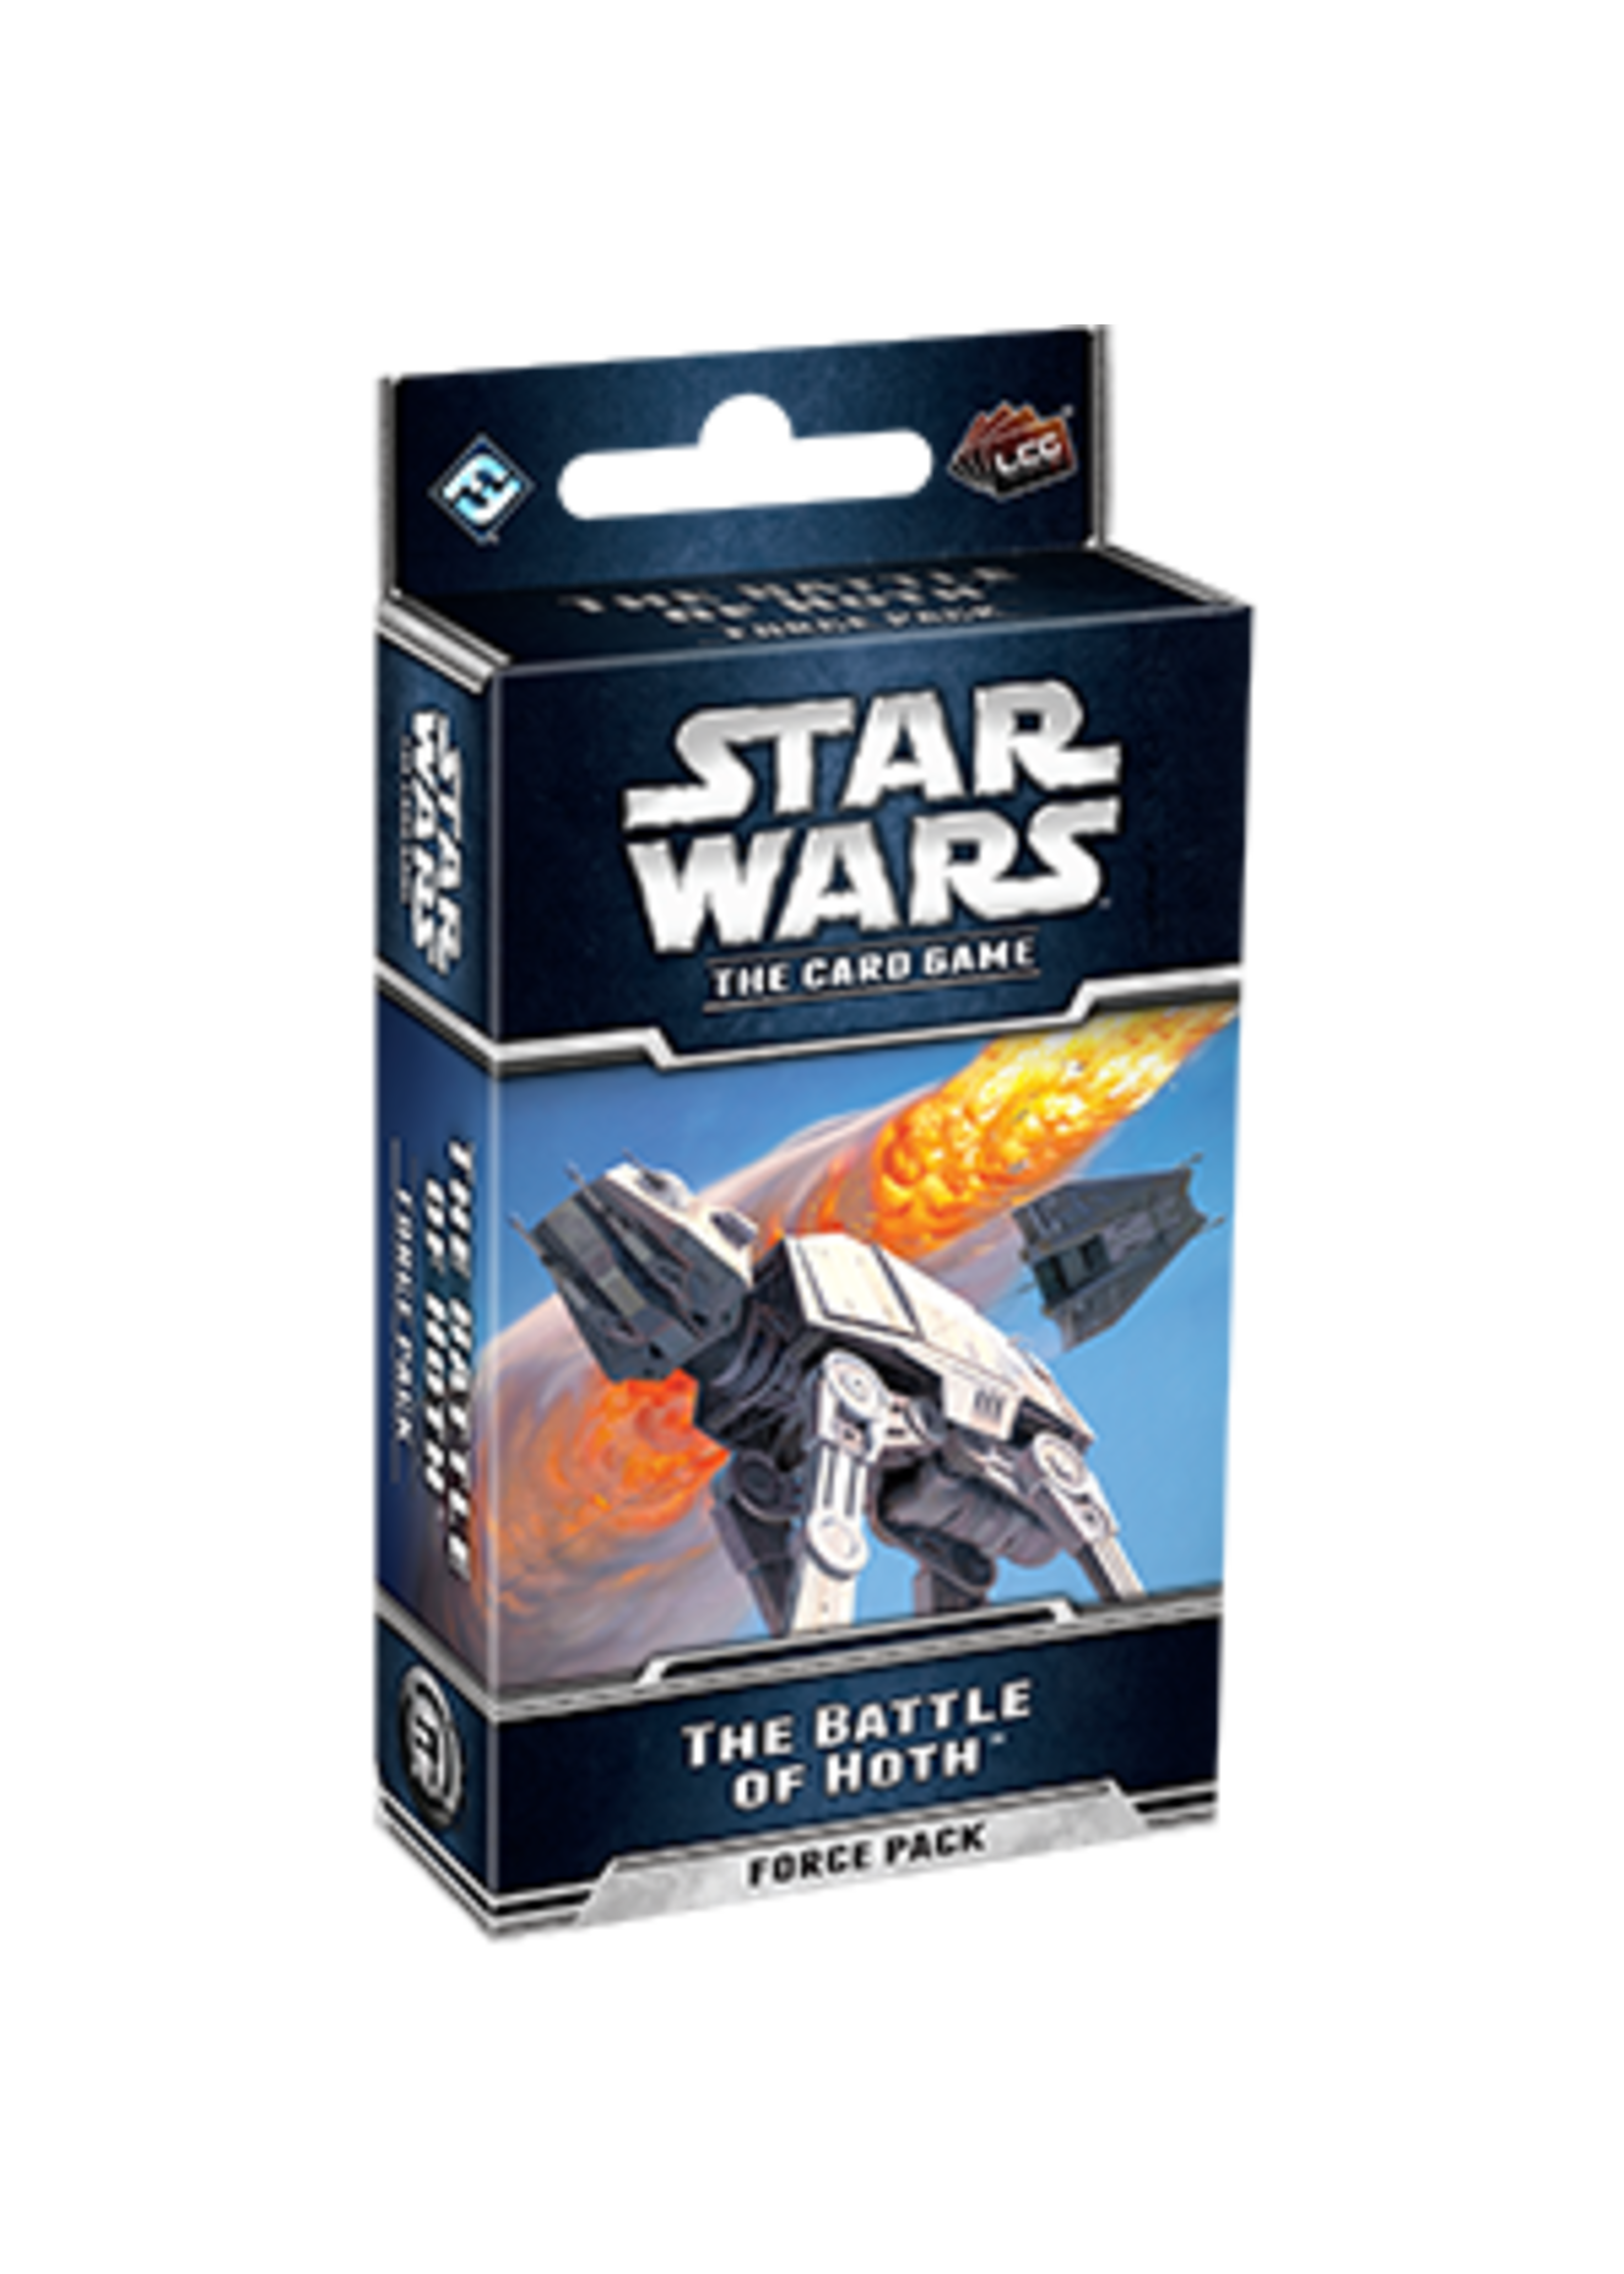 Star Wars LCG: The Battle of Hoth Force Pack